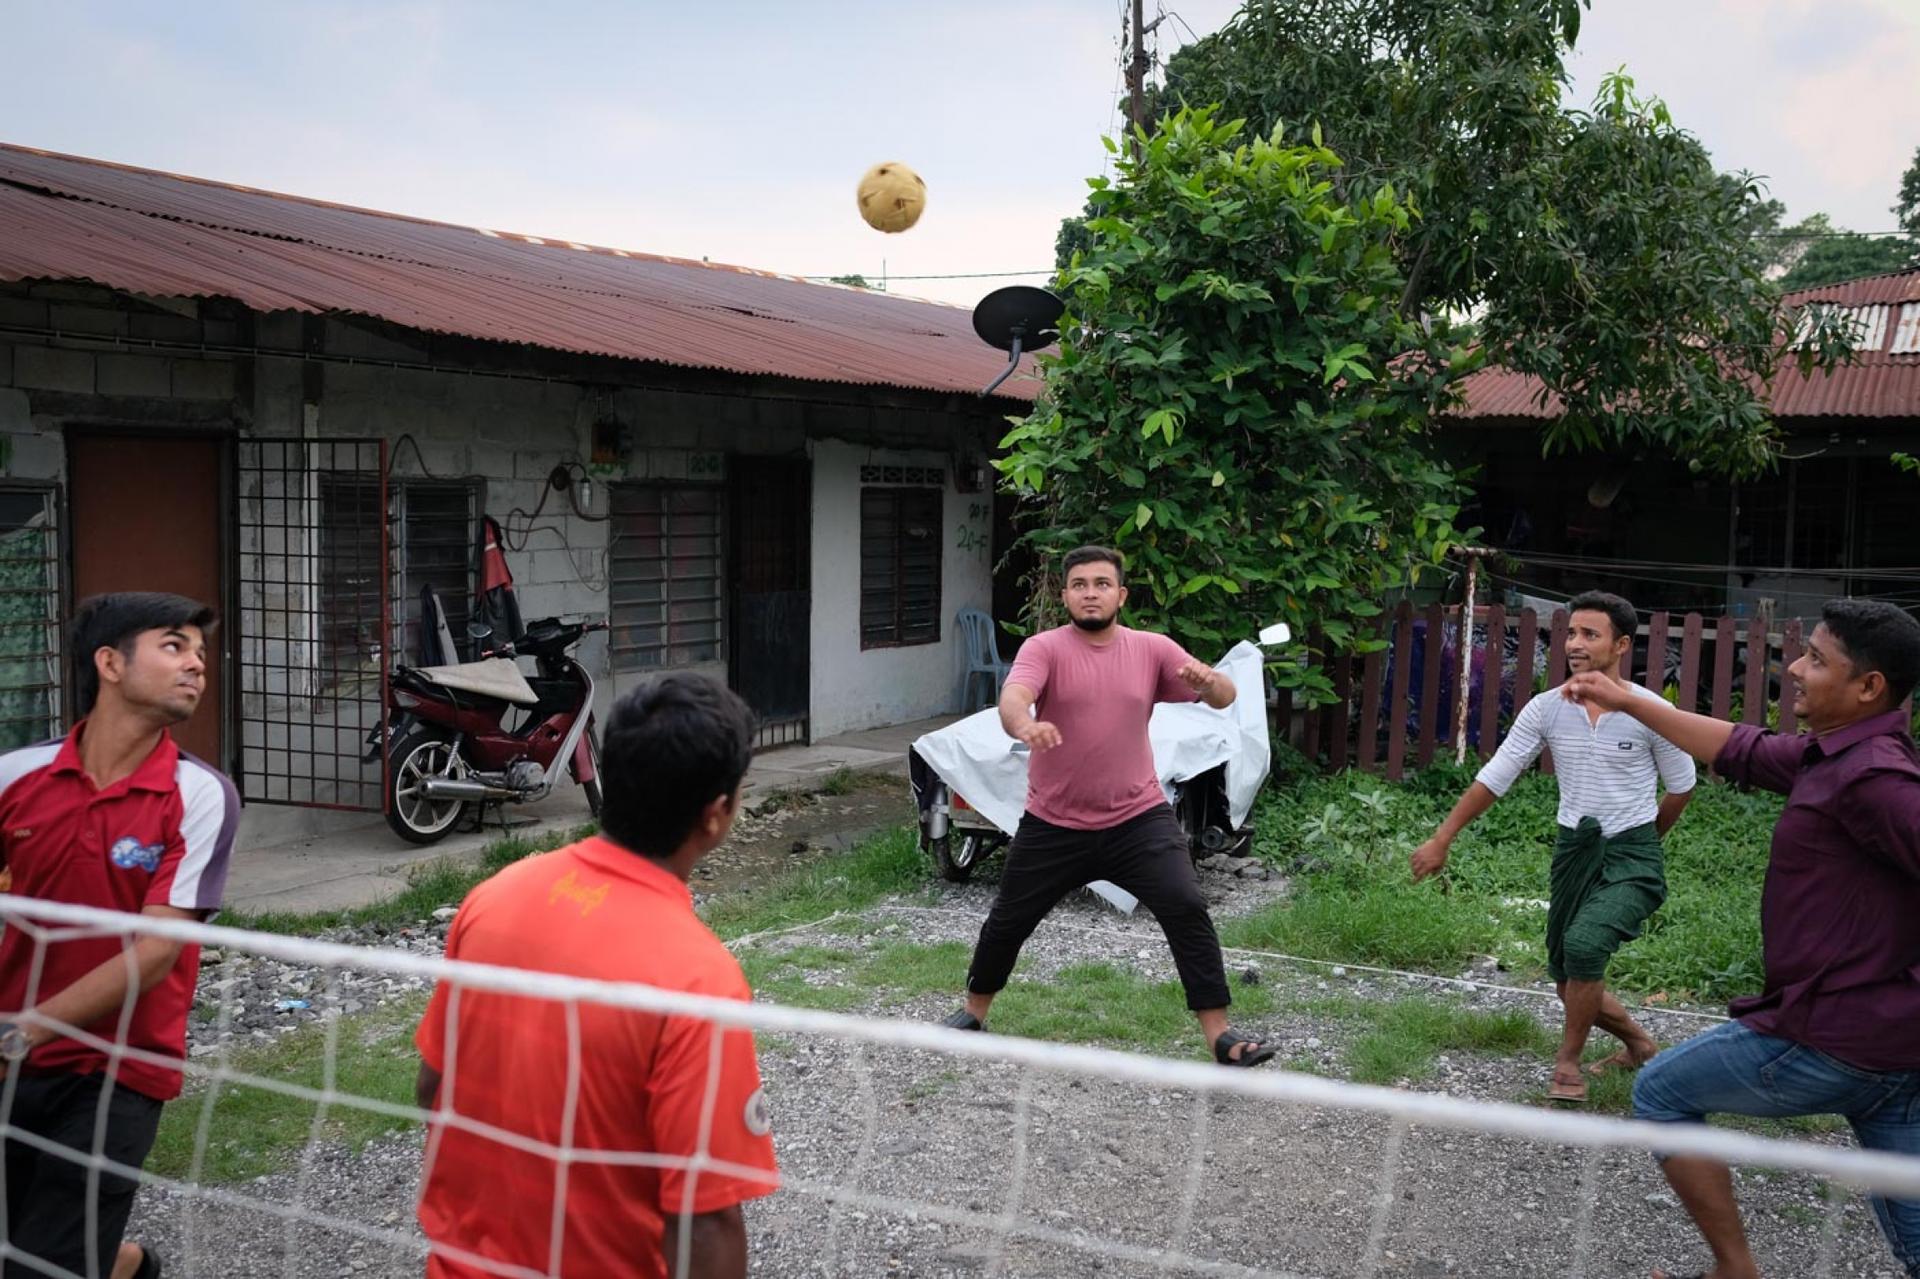 A group of young men play kick volleyball with a net 